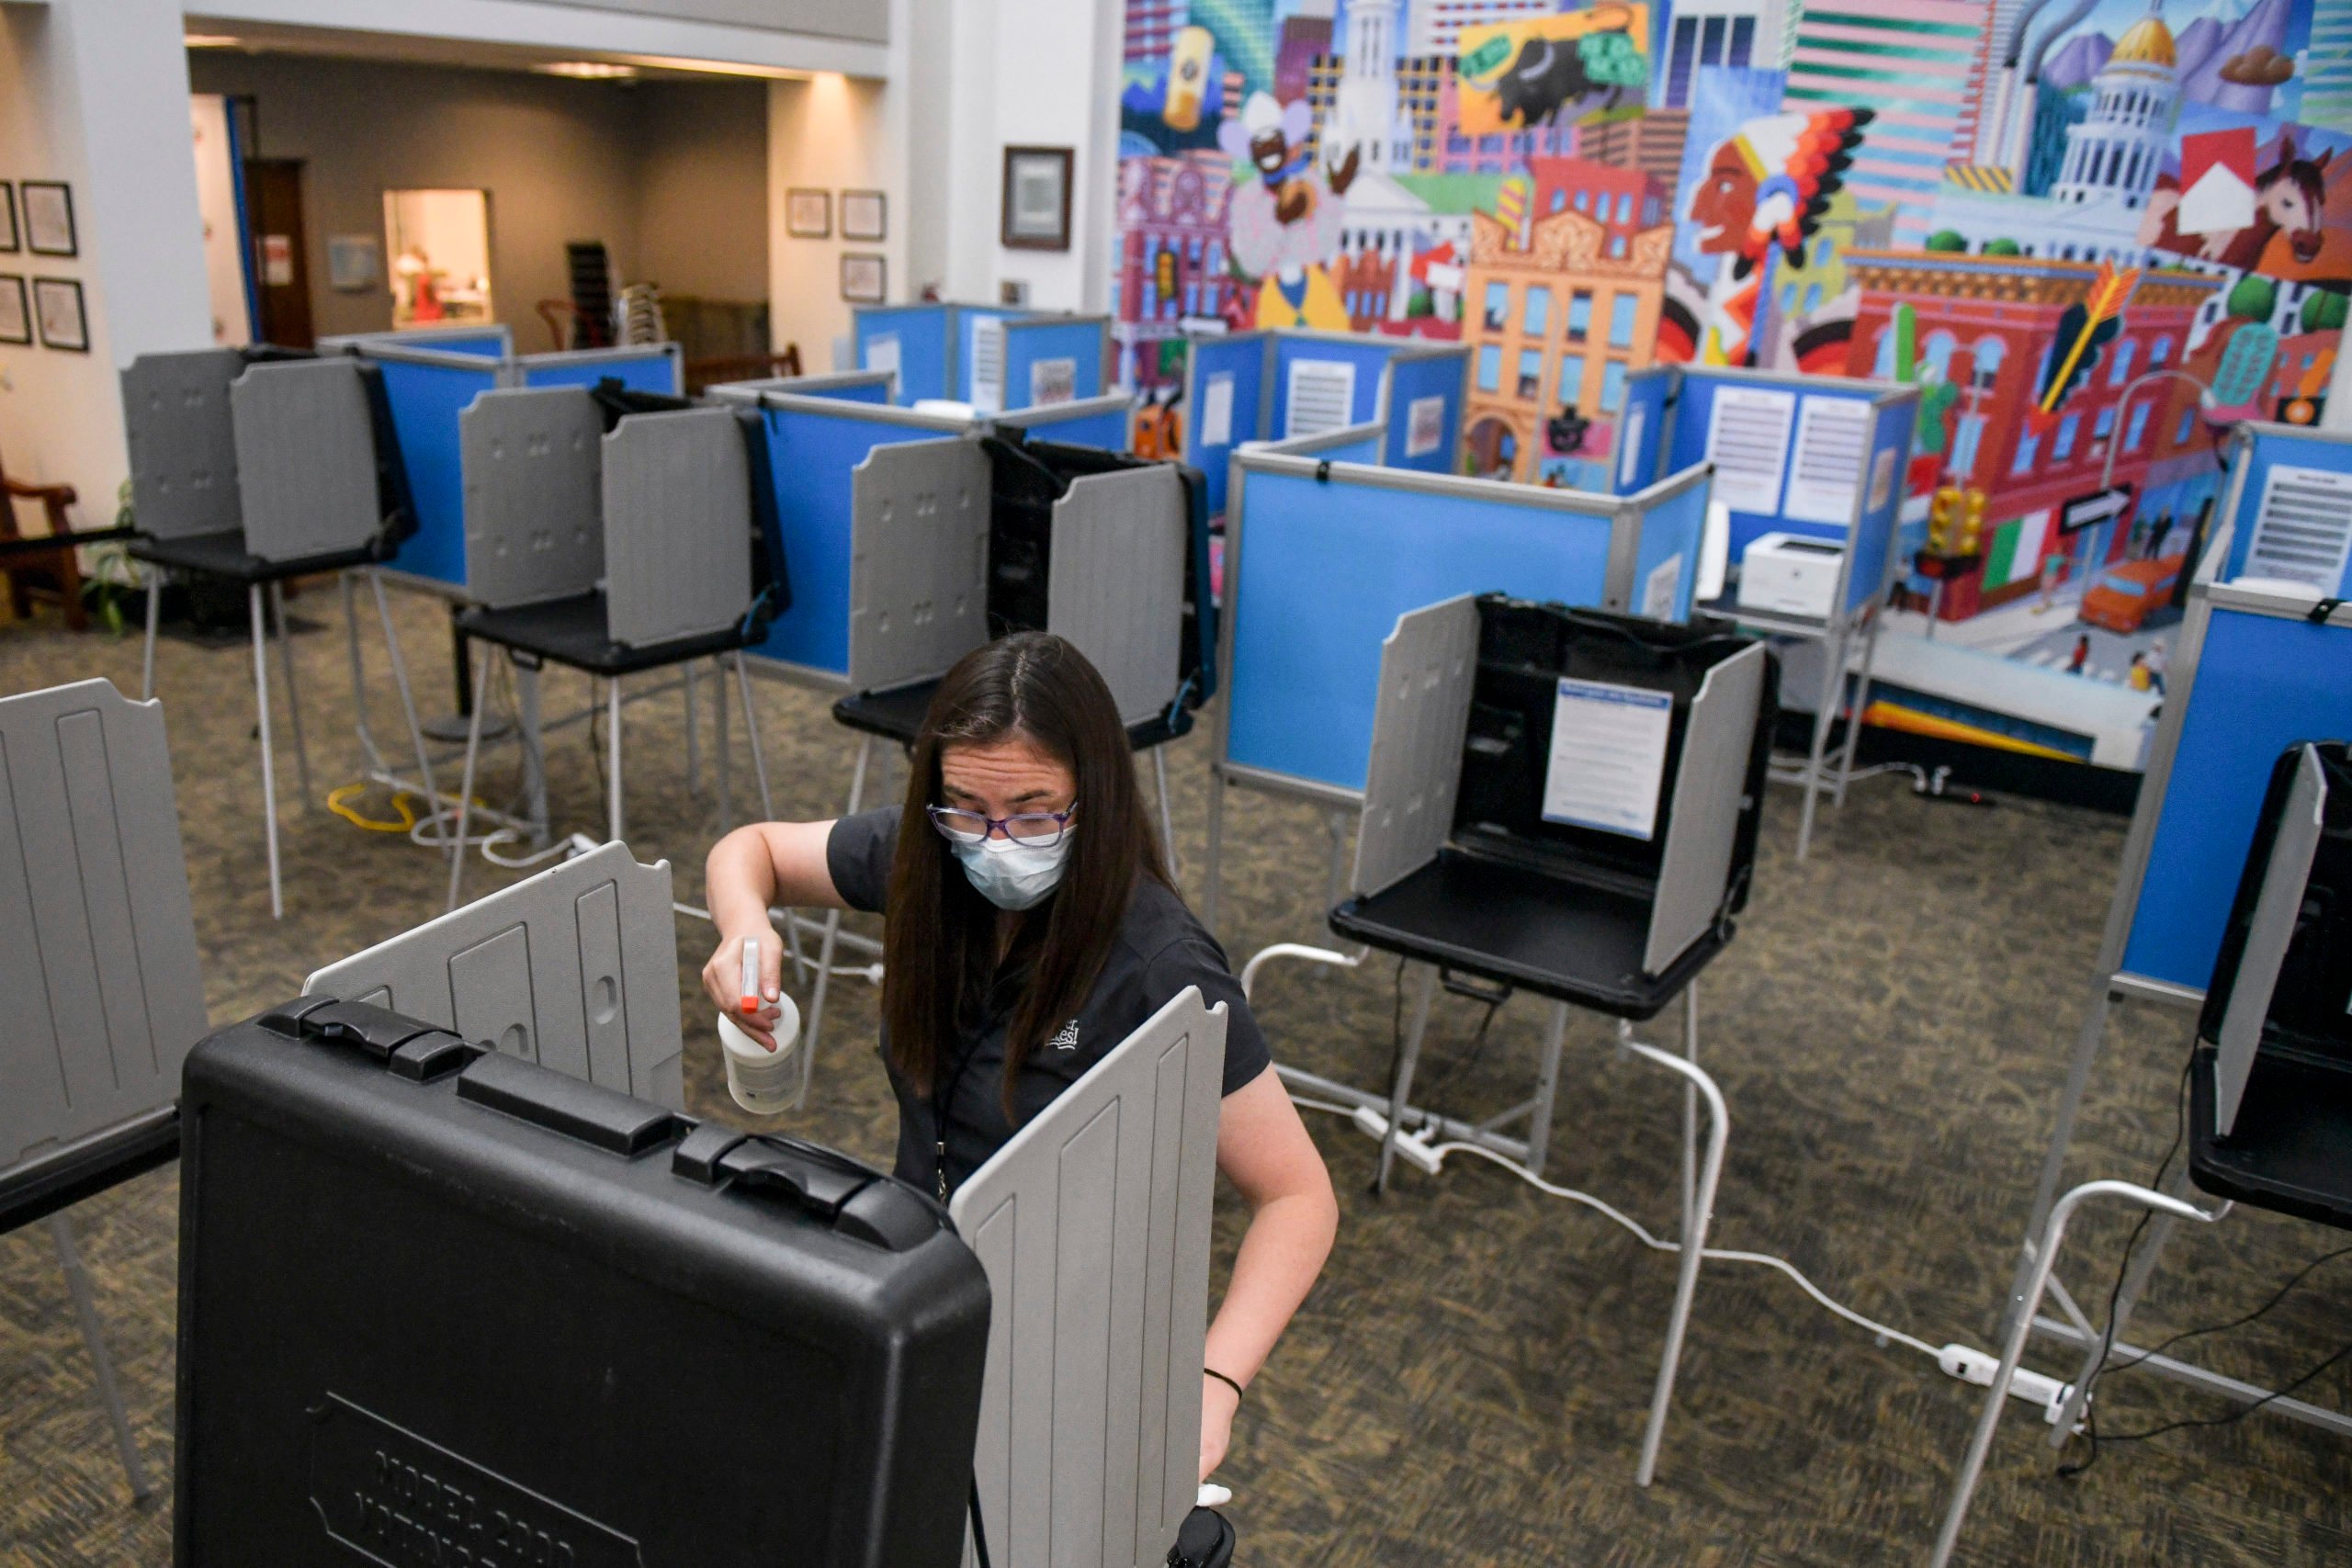 DENVER, CO - JUNE 30: Election judge Miriam Dubinsky sanitizes a voting booth as people vote in the primary election on June 30, 2020 in Denver, Colorado. Voters will decide between former Gov. John Hickenlooper and former Colorado House of Representatives Speaker Andrew Romanoff to face off in the November U.S. Senate race against Sen. Cory Gardner. (Photo by Michael Ciaglo/Getty Images)